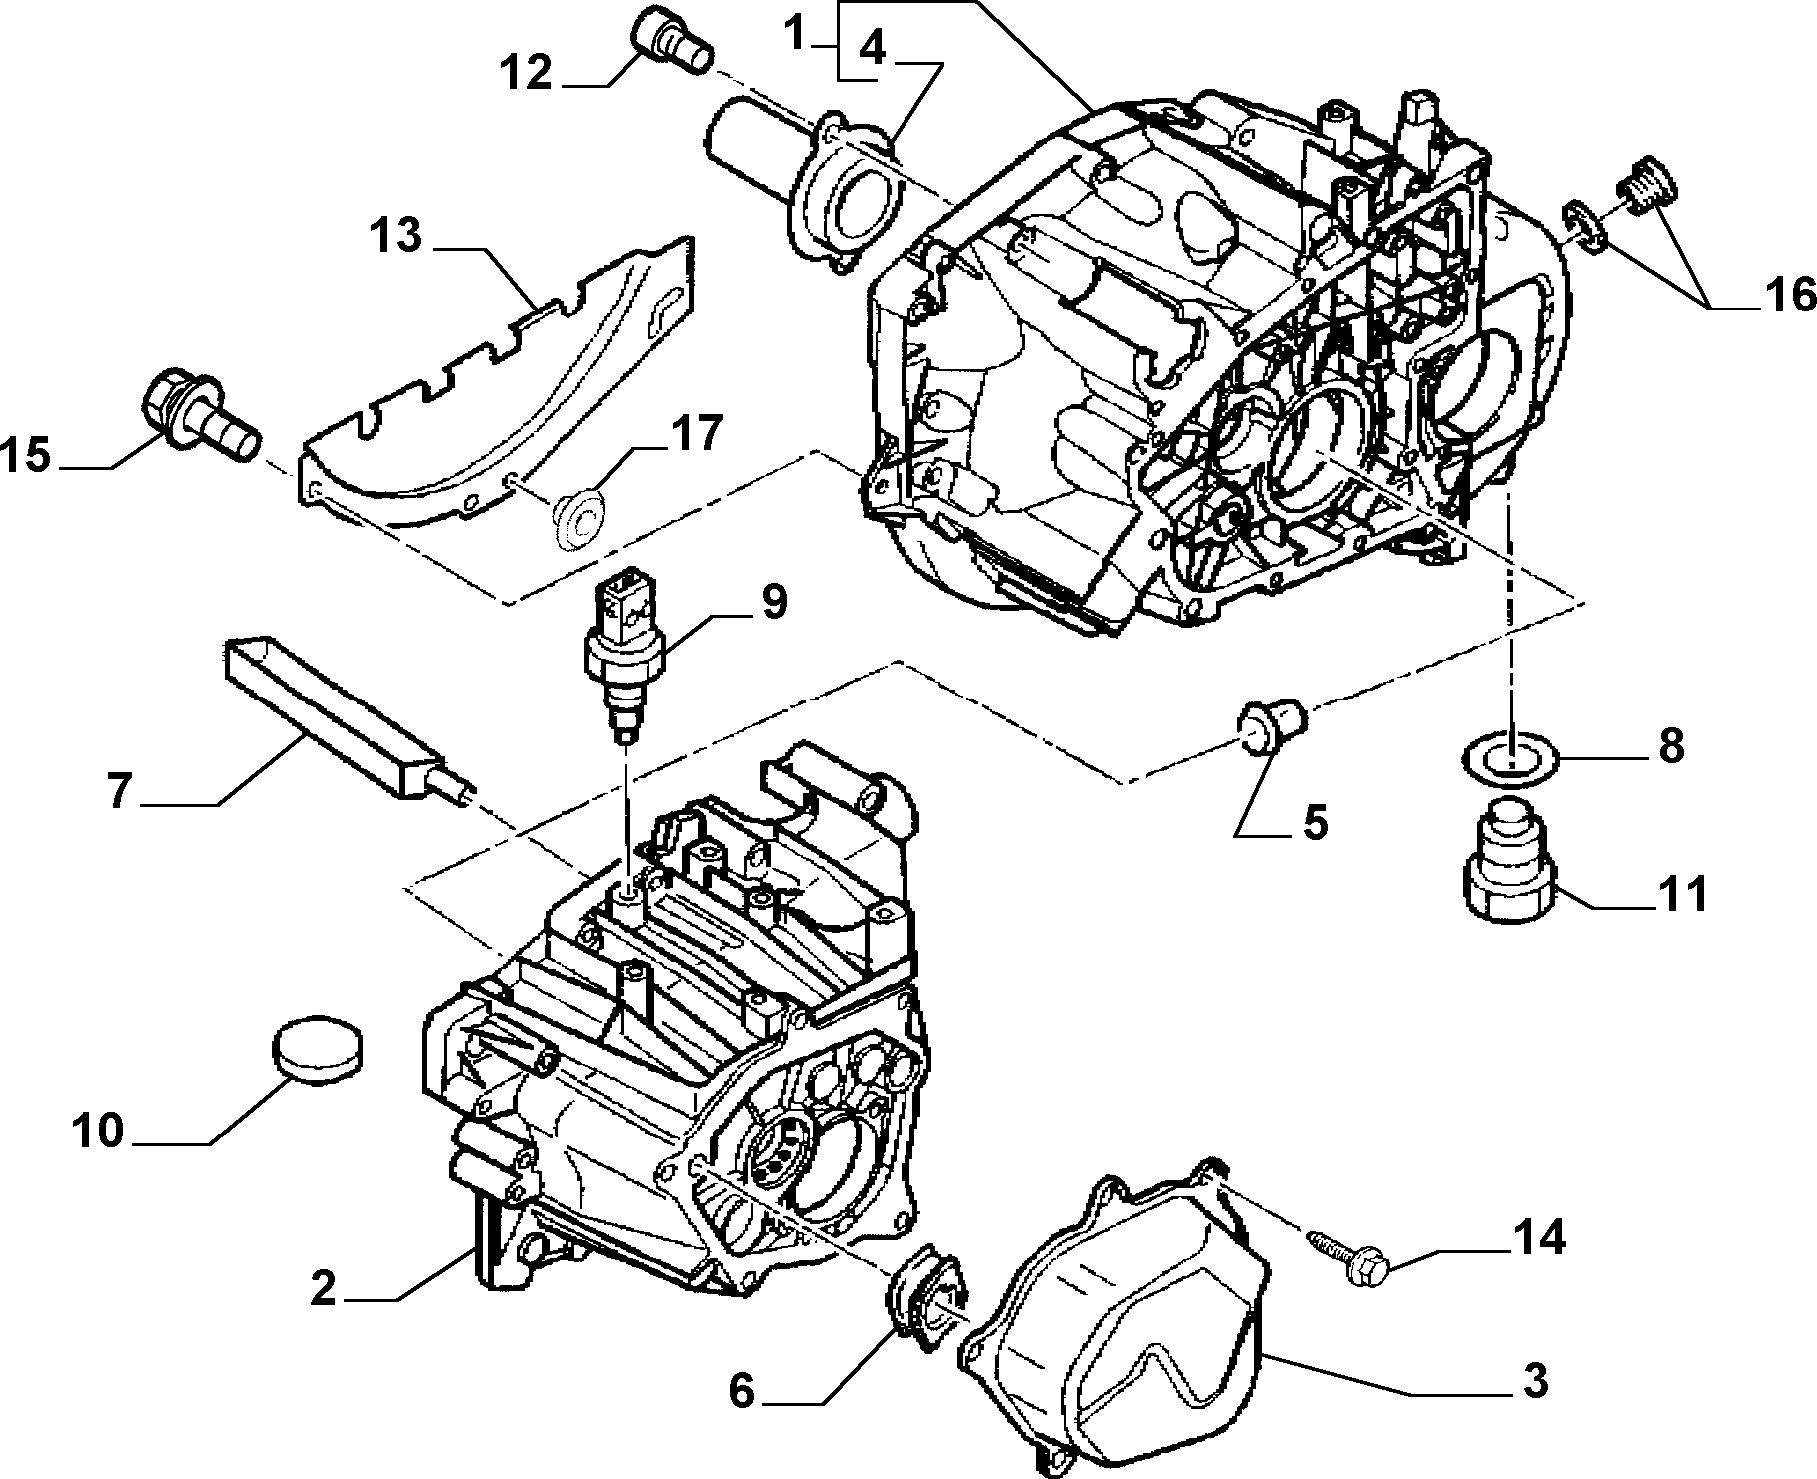 TRANSMISSION AND DIFFERENTIAL UNIT, CASING AND COVERS สำหรับ Lancia ZETA "Z" (1994 - 2002)